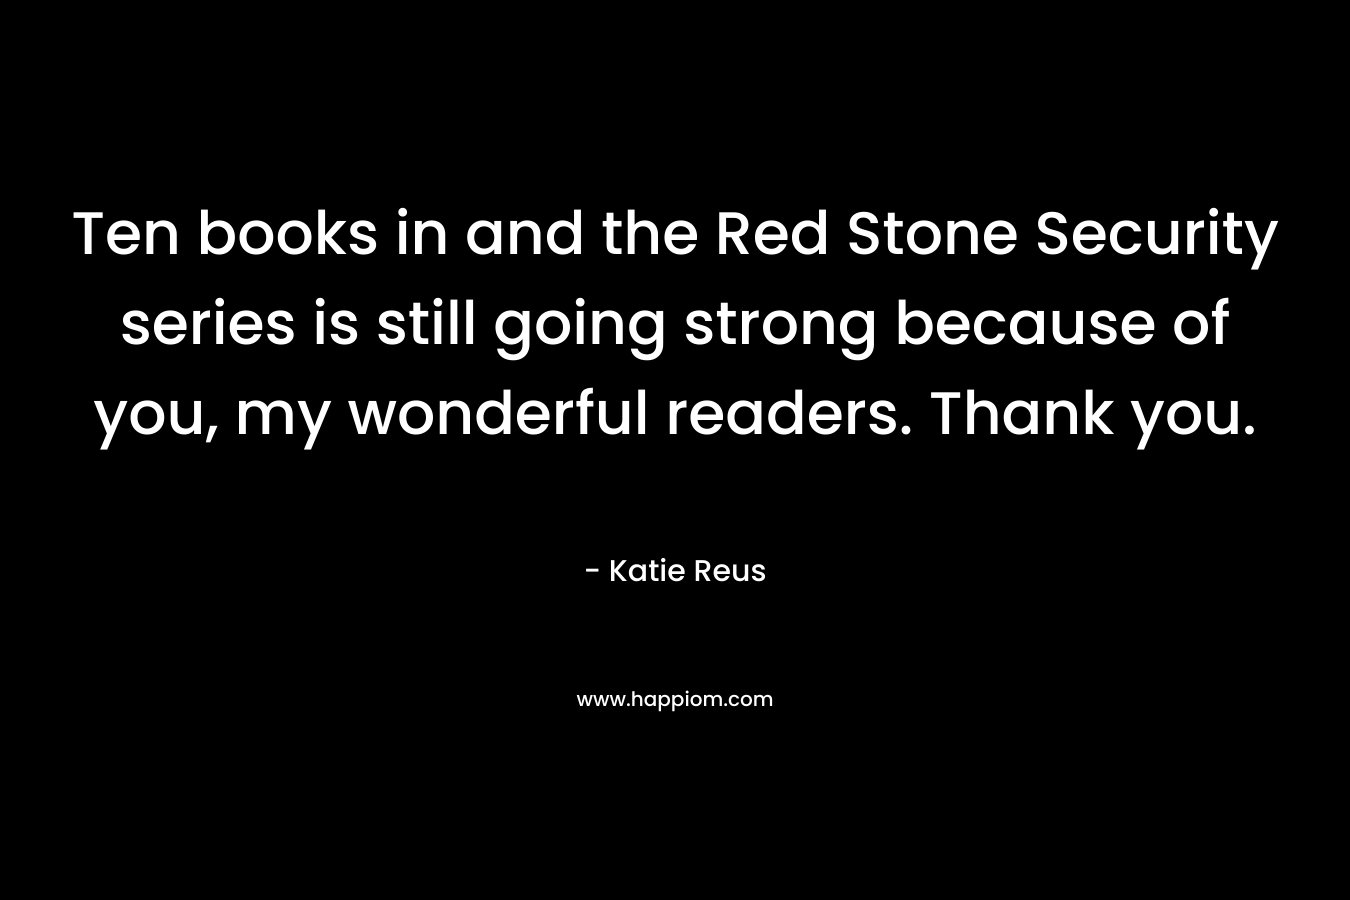 Ten books in and the Red Stone Security series is still going strong because of you, my wonderful readers. Thank you.